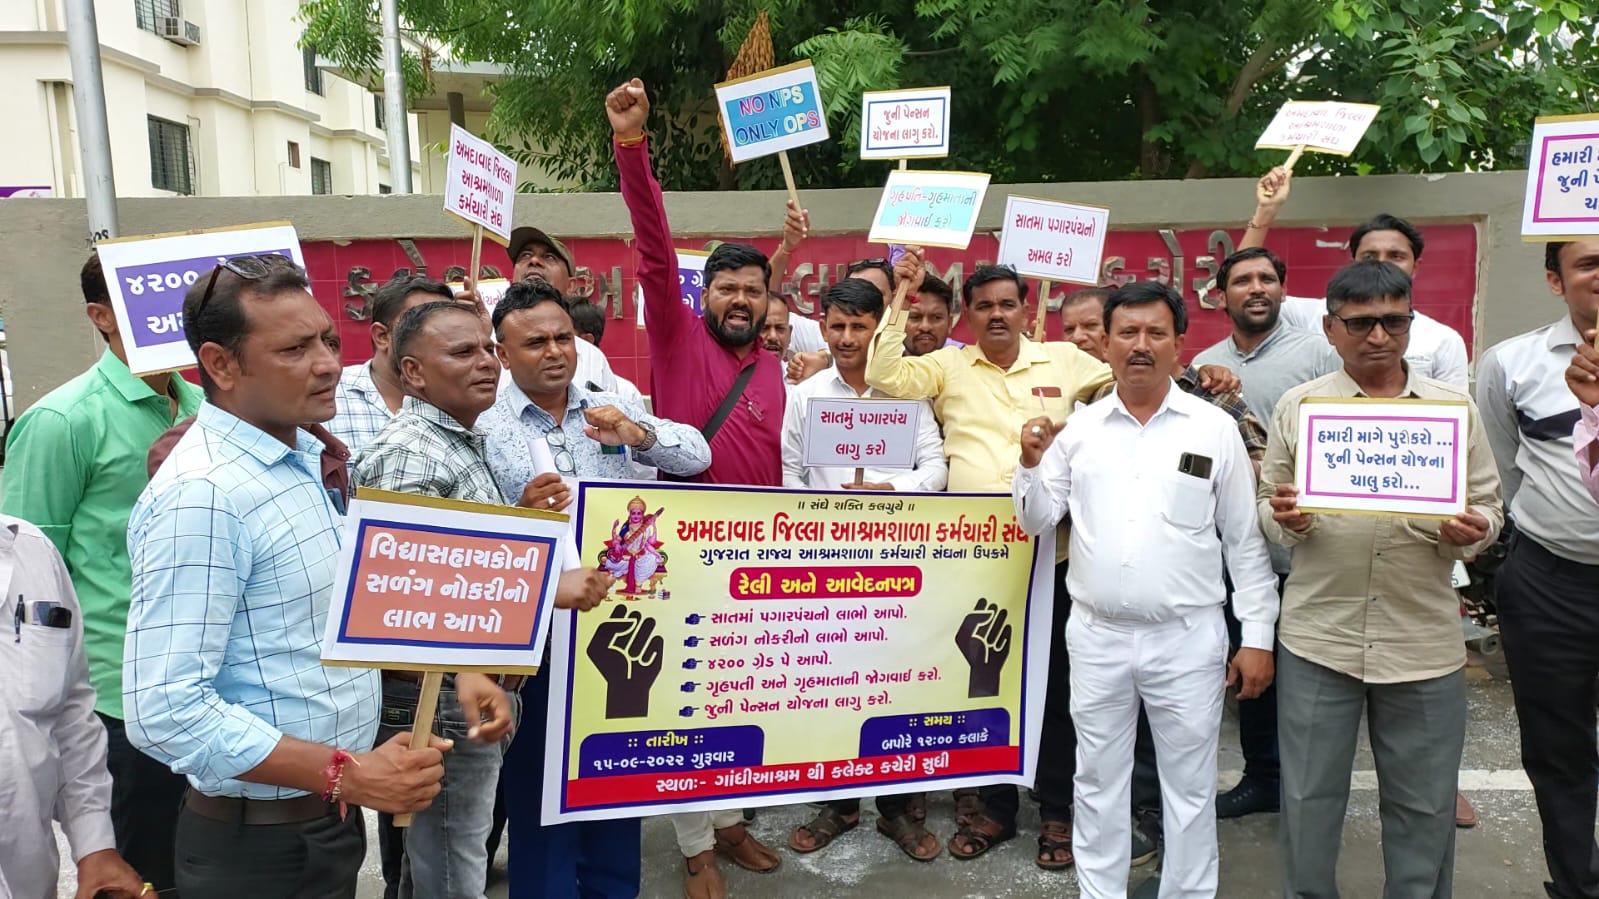 Ashramshala Employees Union organized a rally on various issues and sent a petition